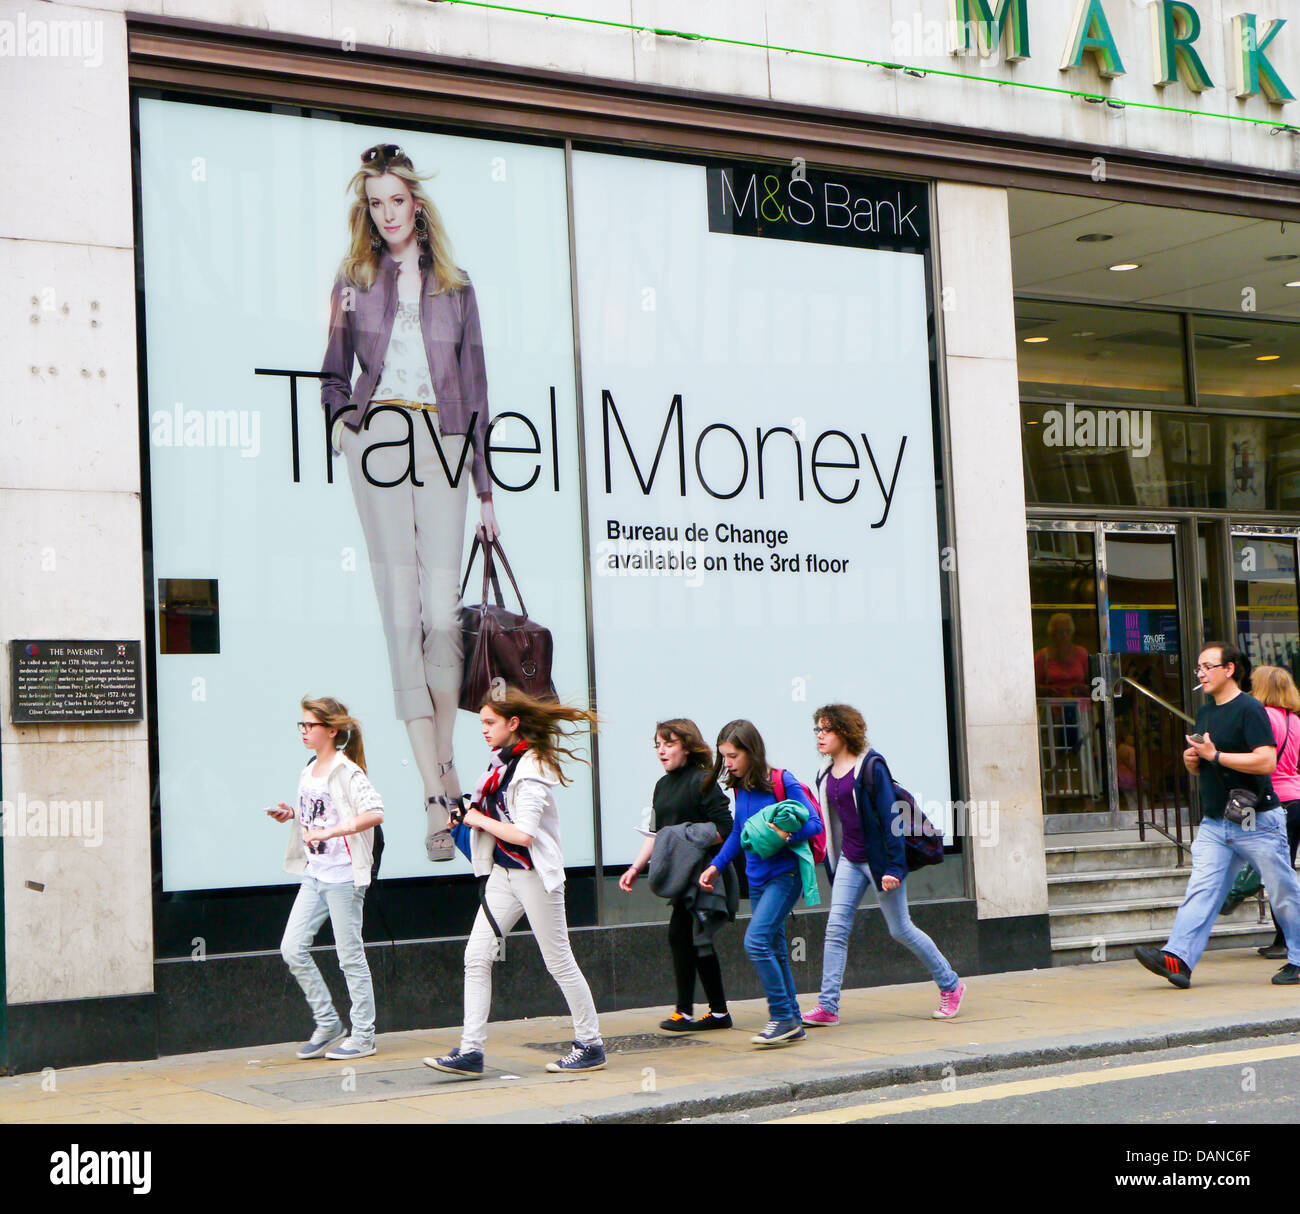 Marks And Spencer 'Travel Money' advertisement in a store window, York, England Stock Photo